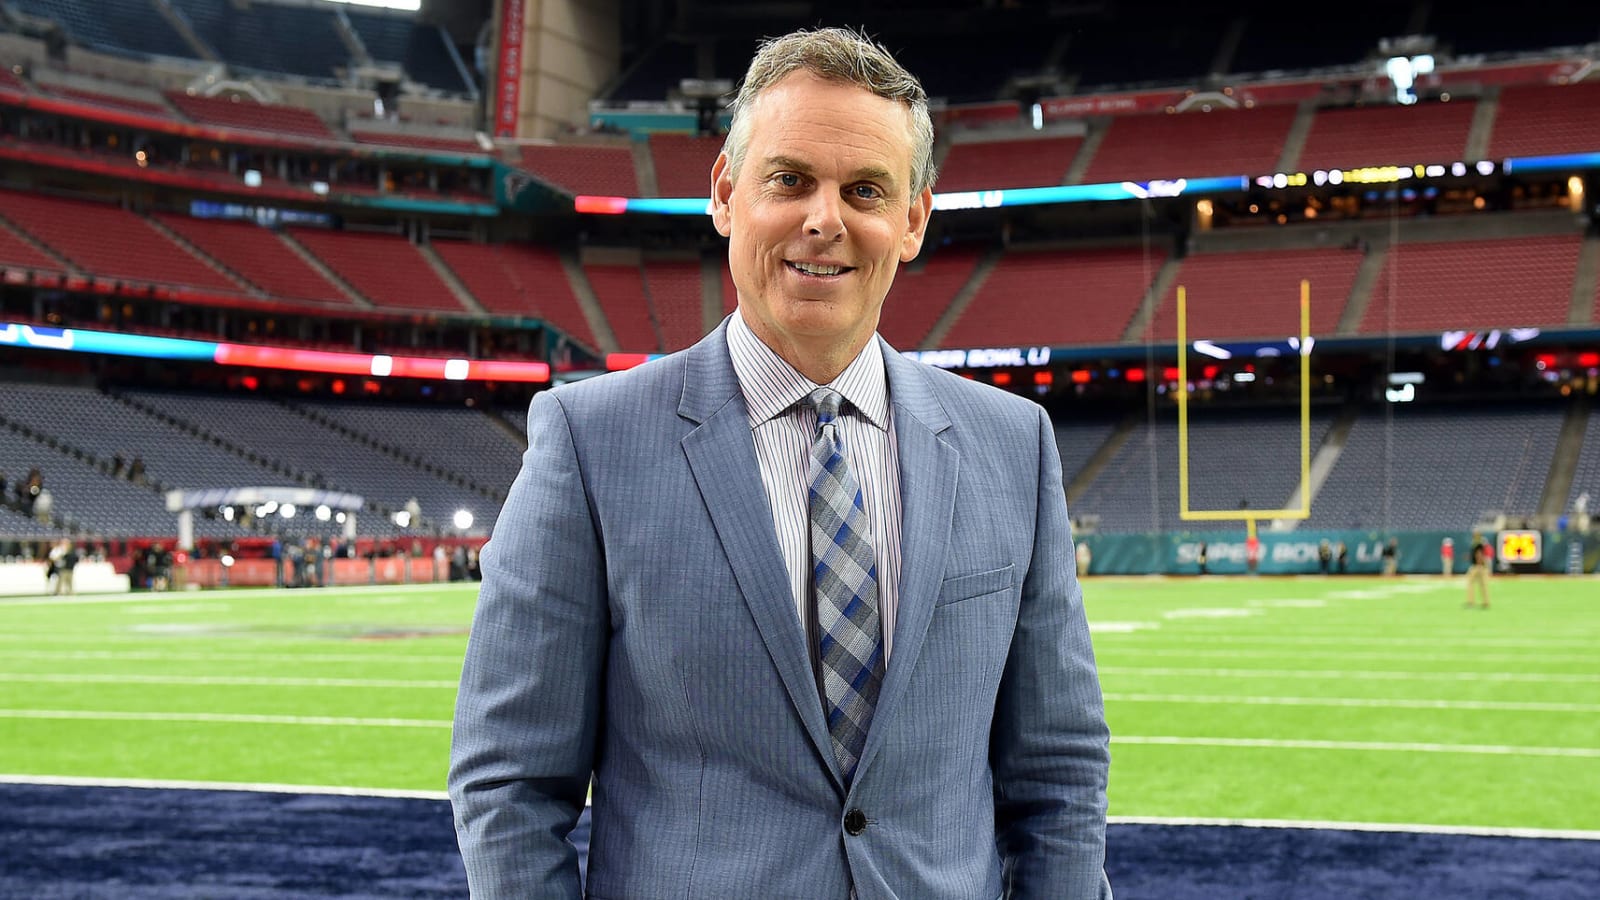 Colin Cowherd ripped for disparaging Dwayne Haskins comment